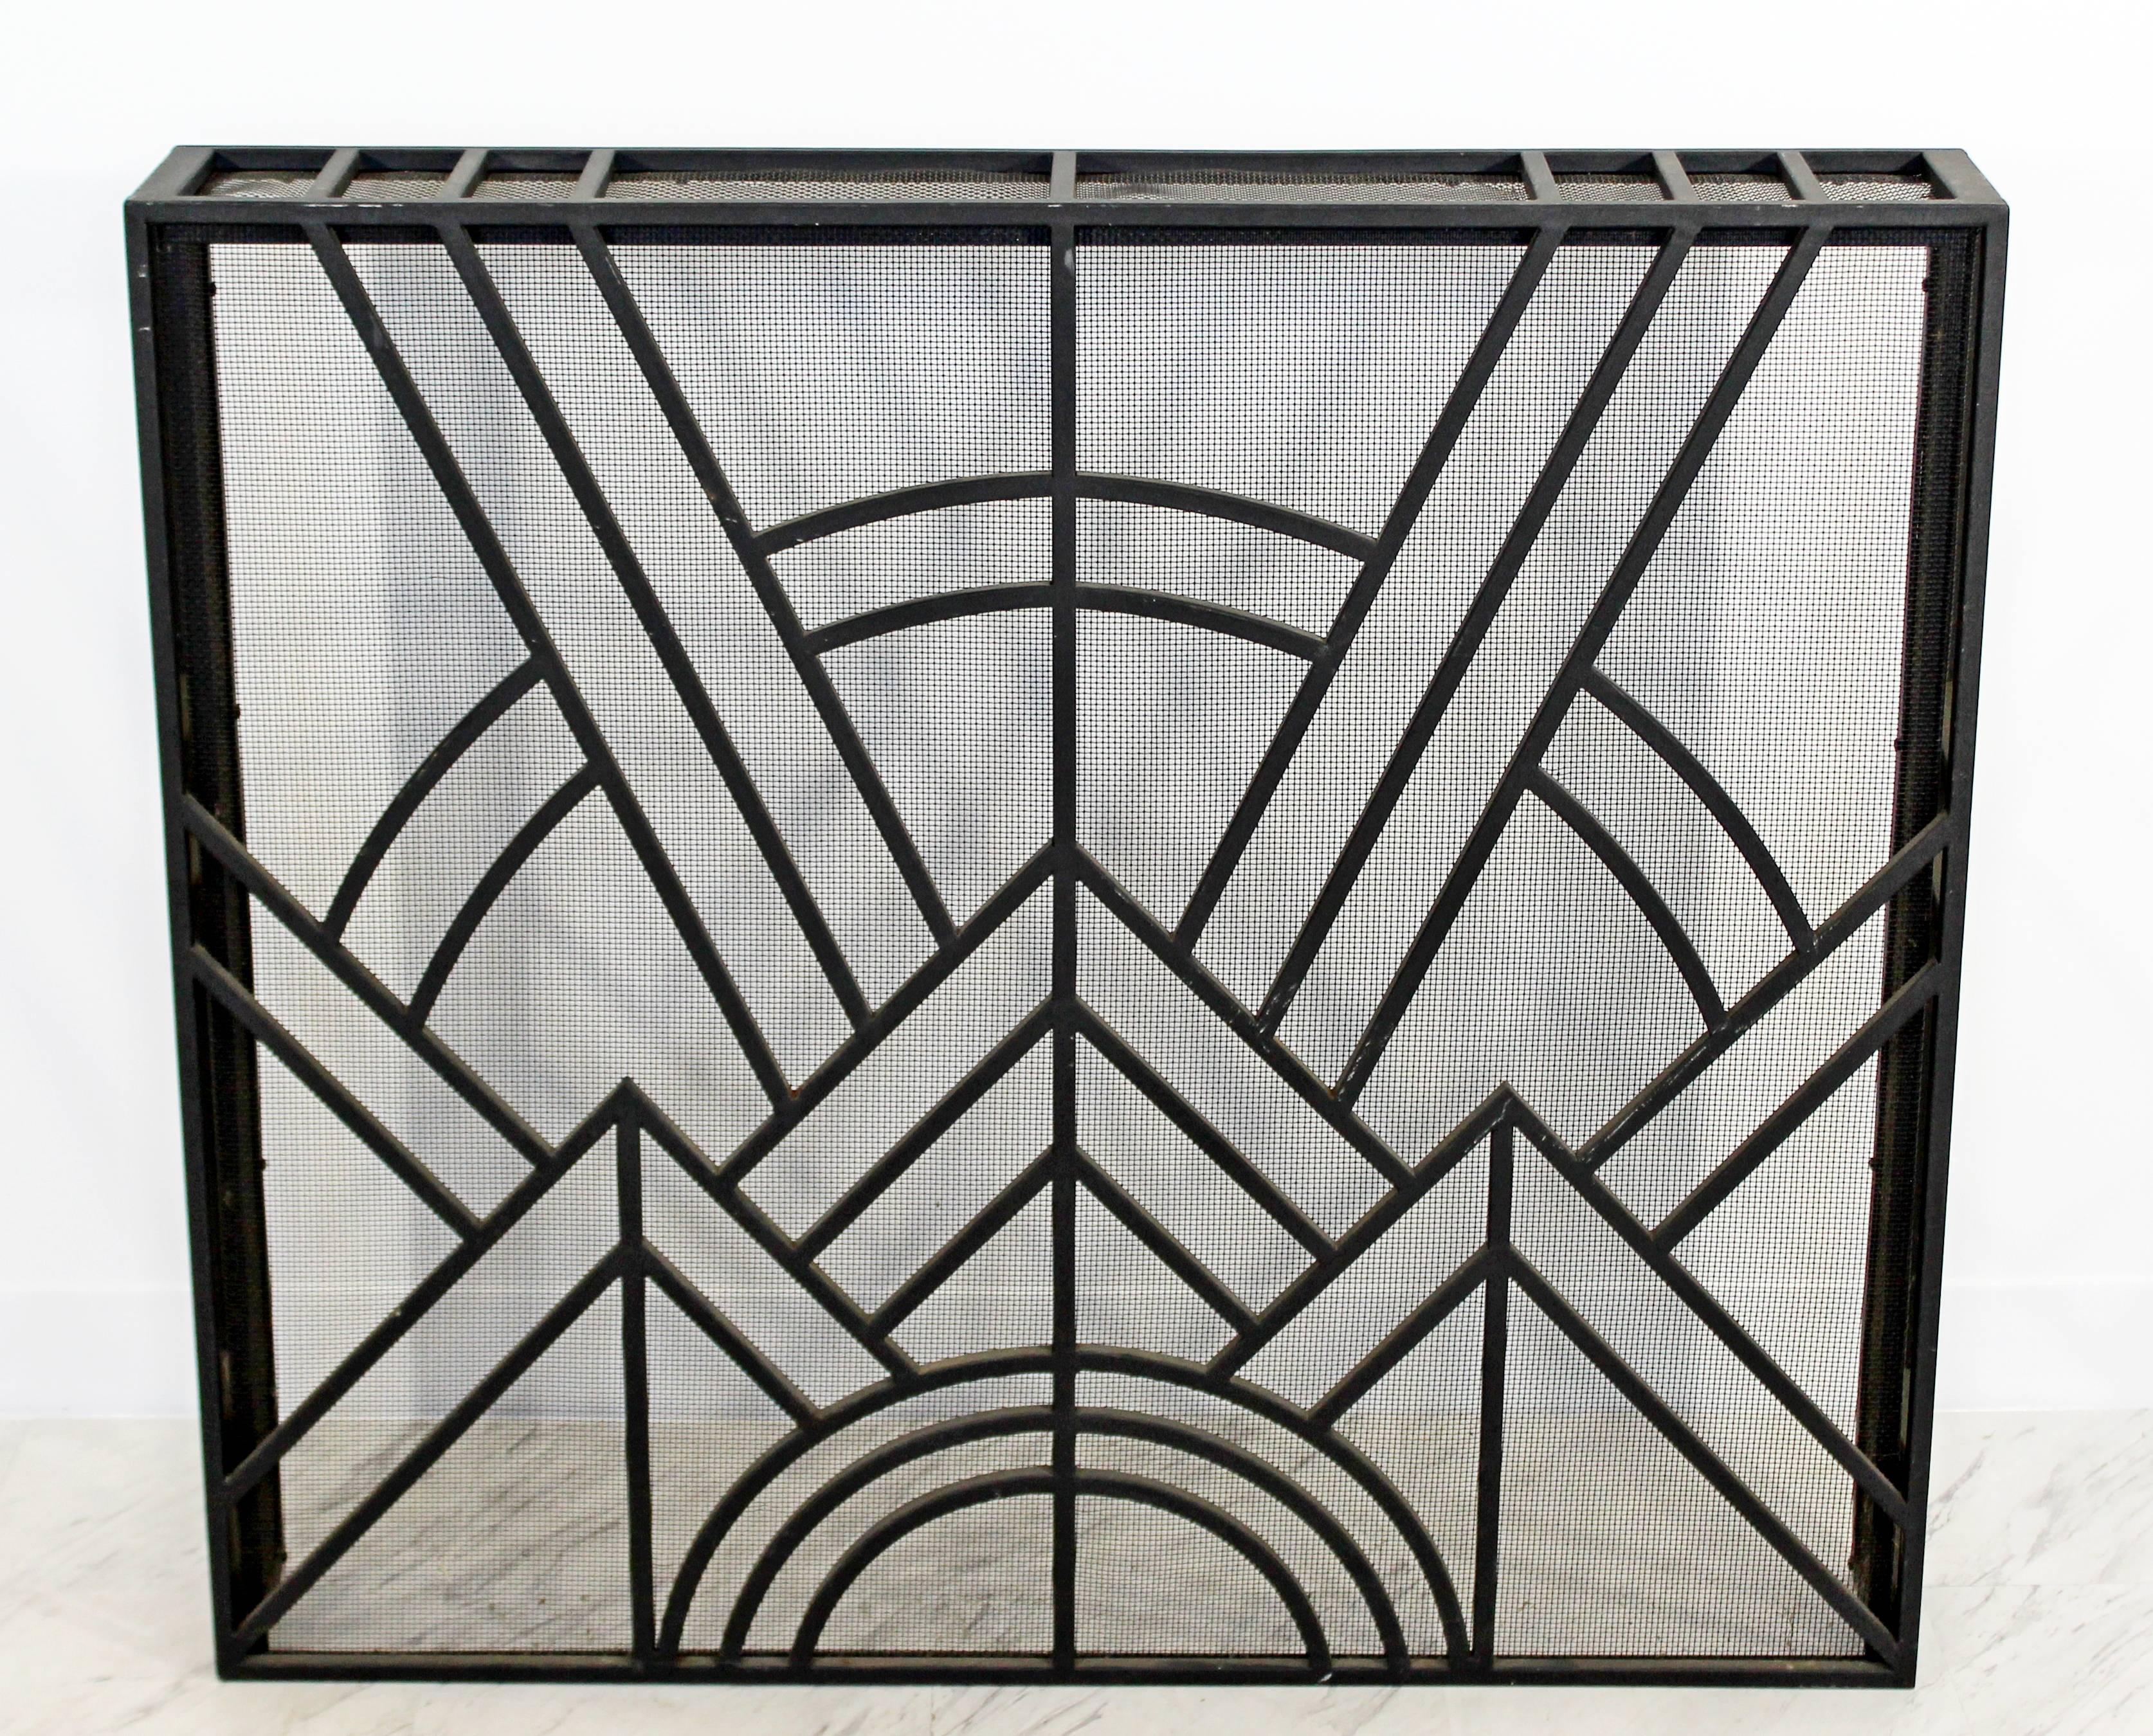 For your consideration is a fabulous, iron fireplace screen. In excellent condition. The dimensions are 40